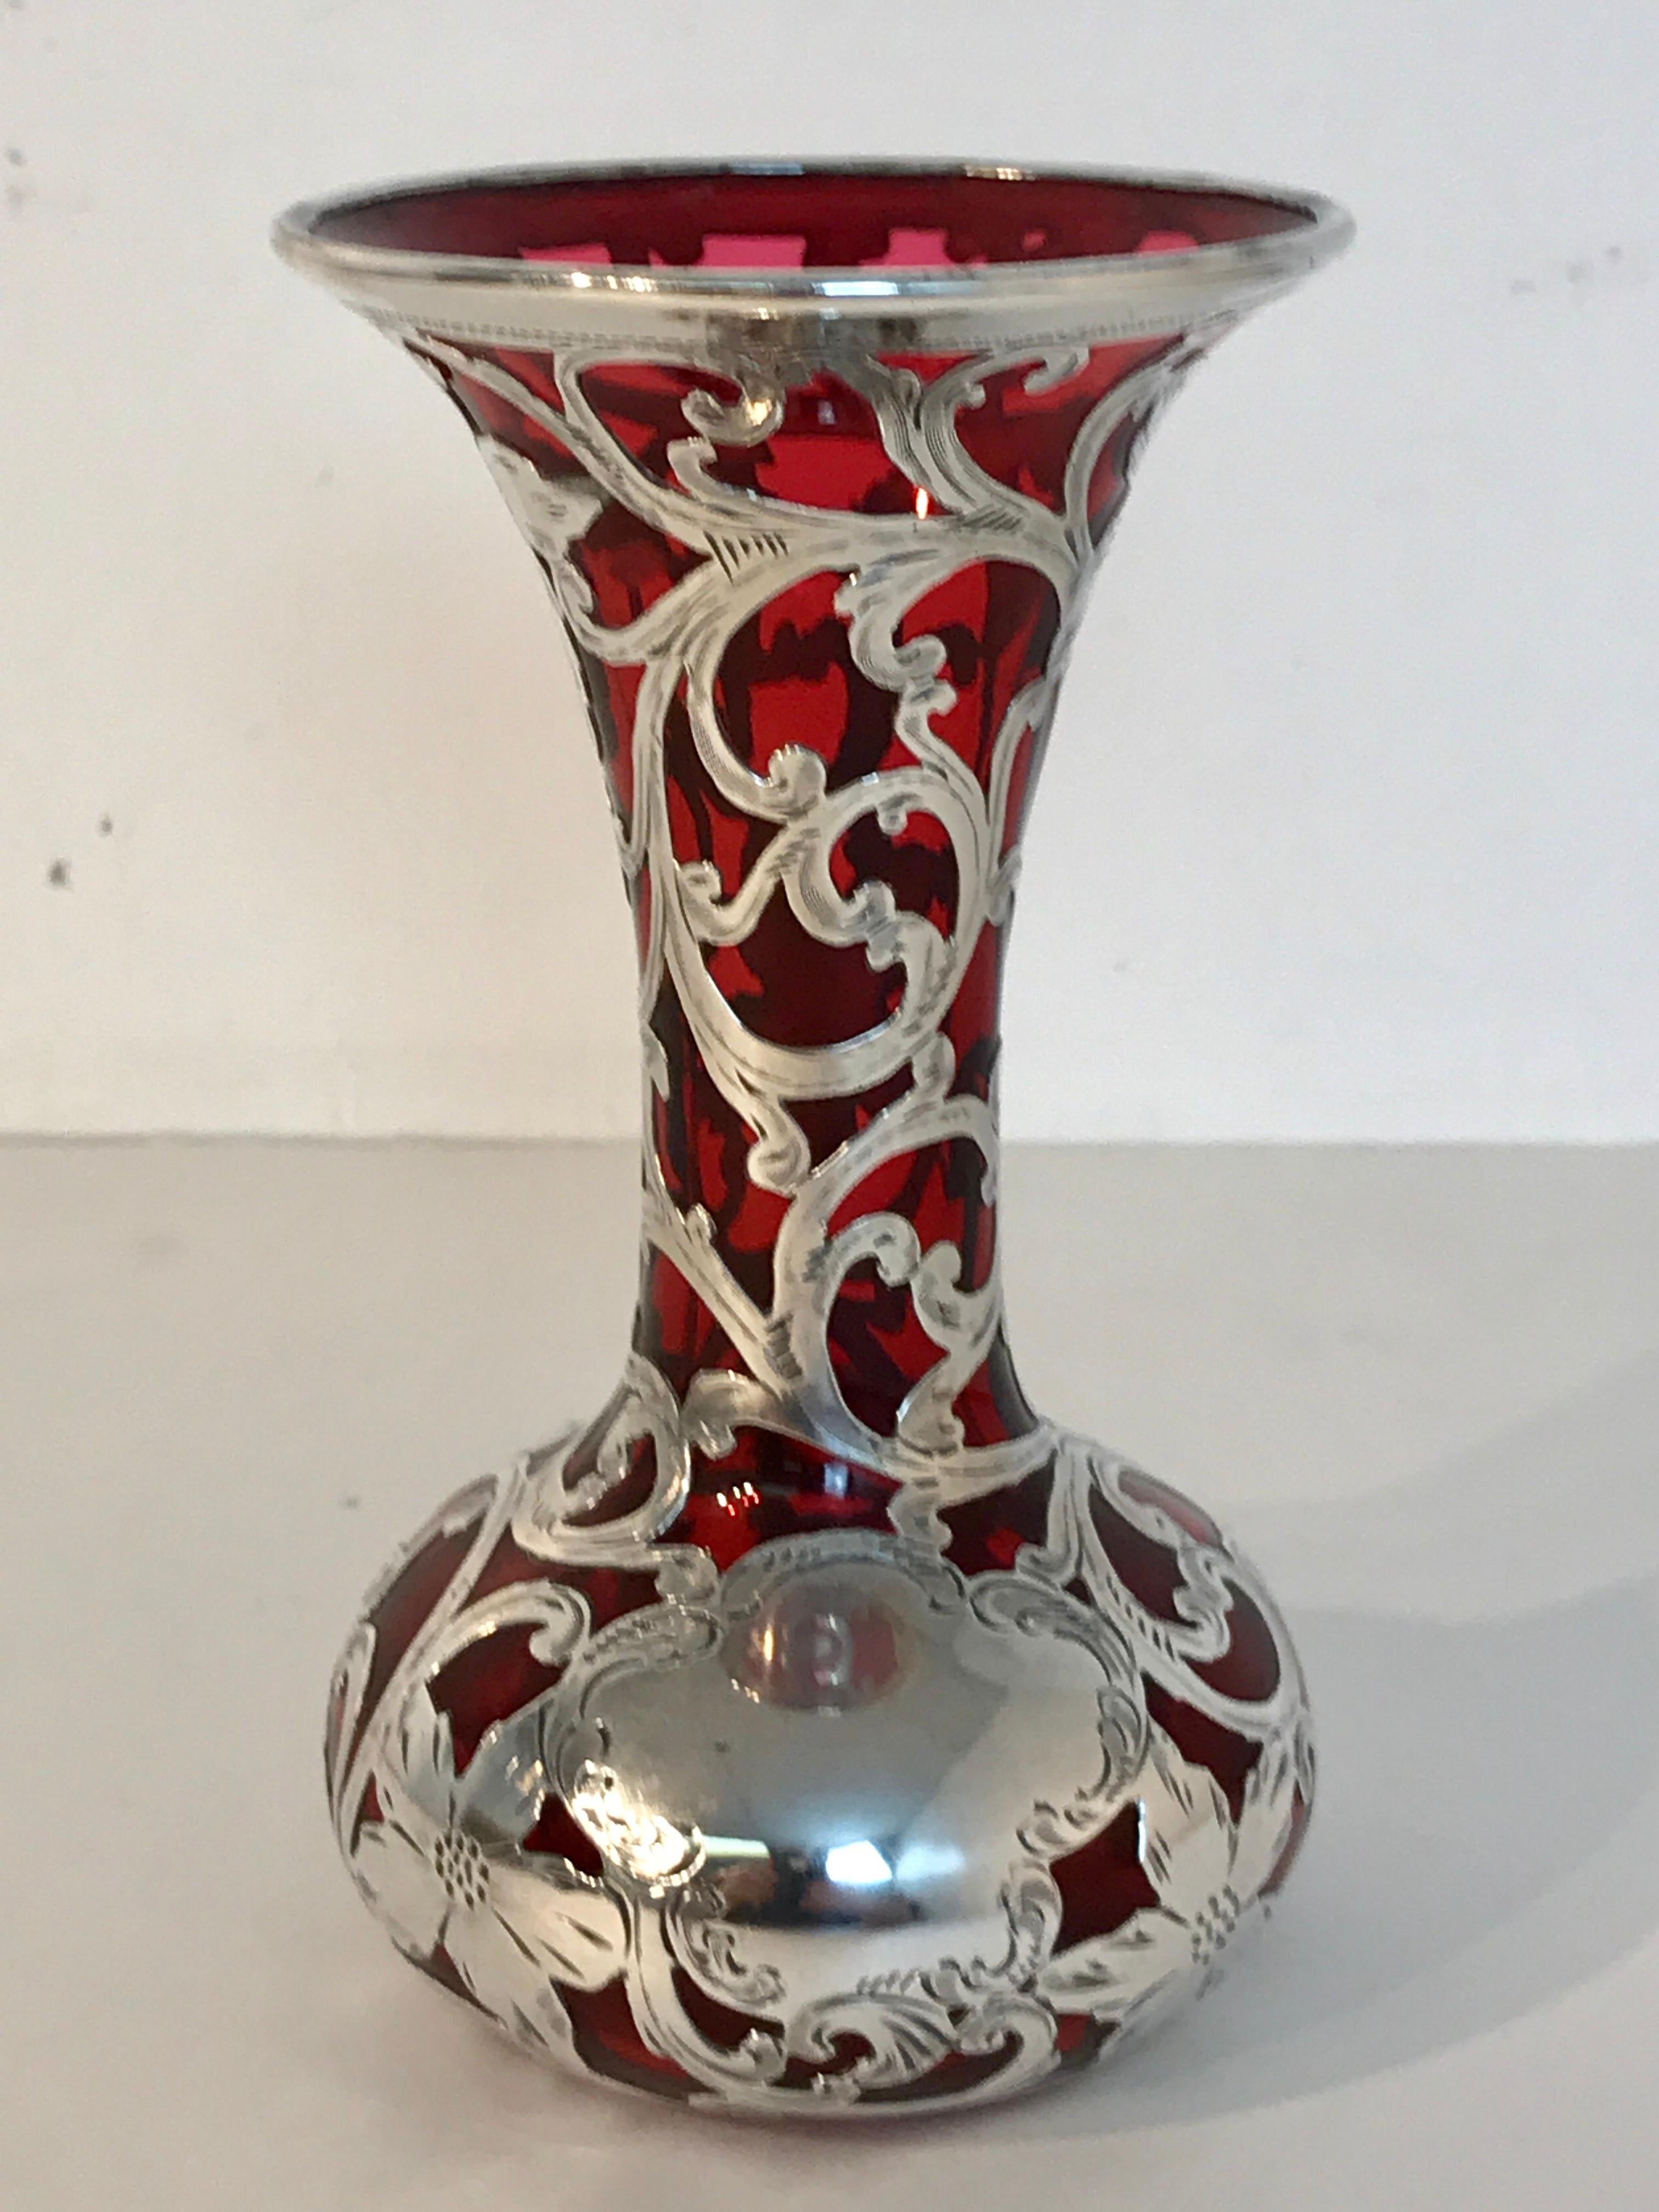 Red Silveroverlay vase, by Alvin Silver Co., with heavy and crisp silverwork, fully marked.